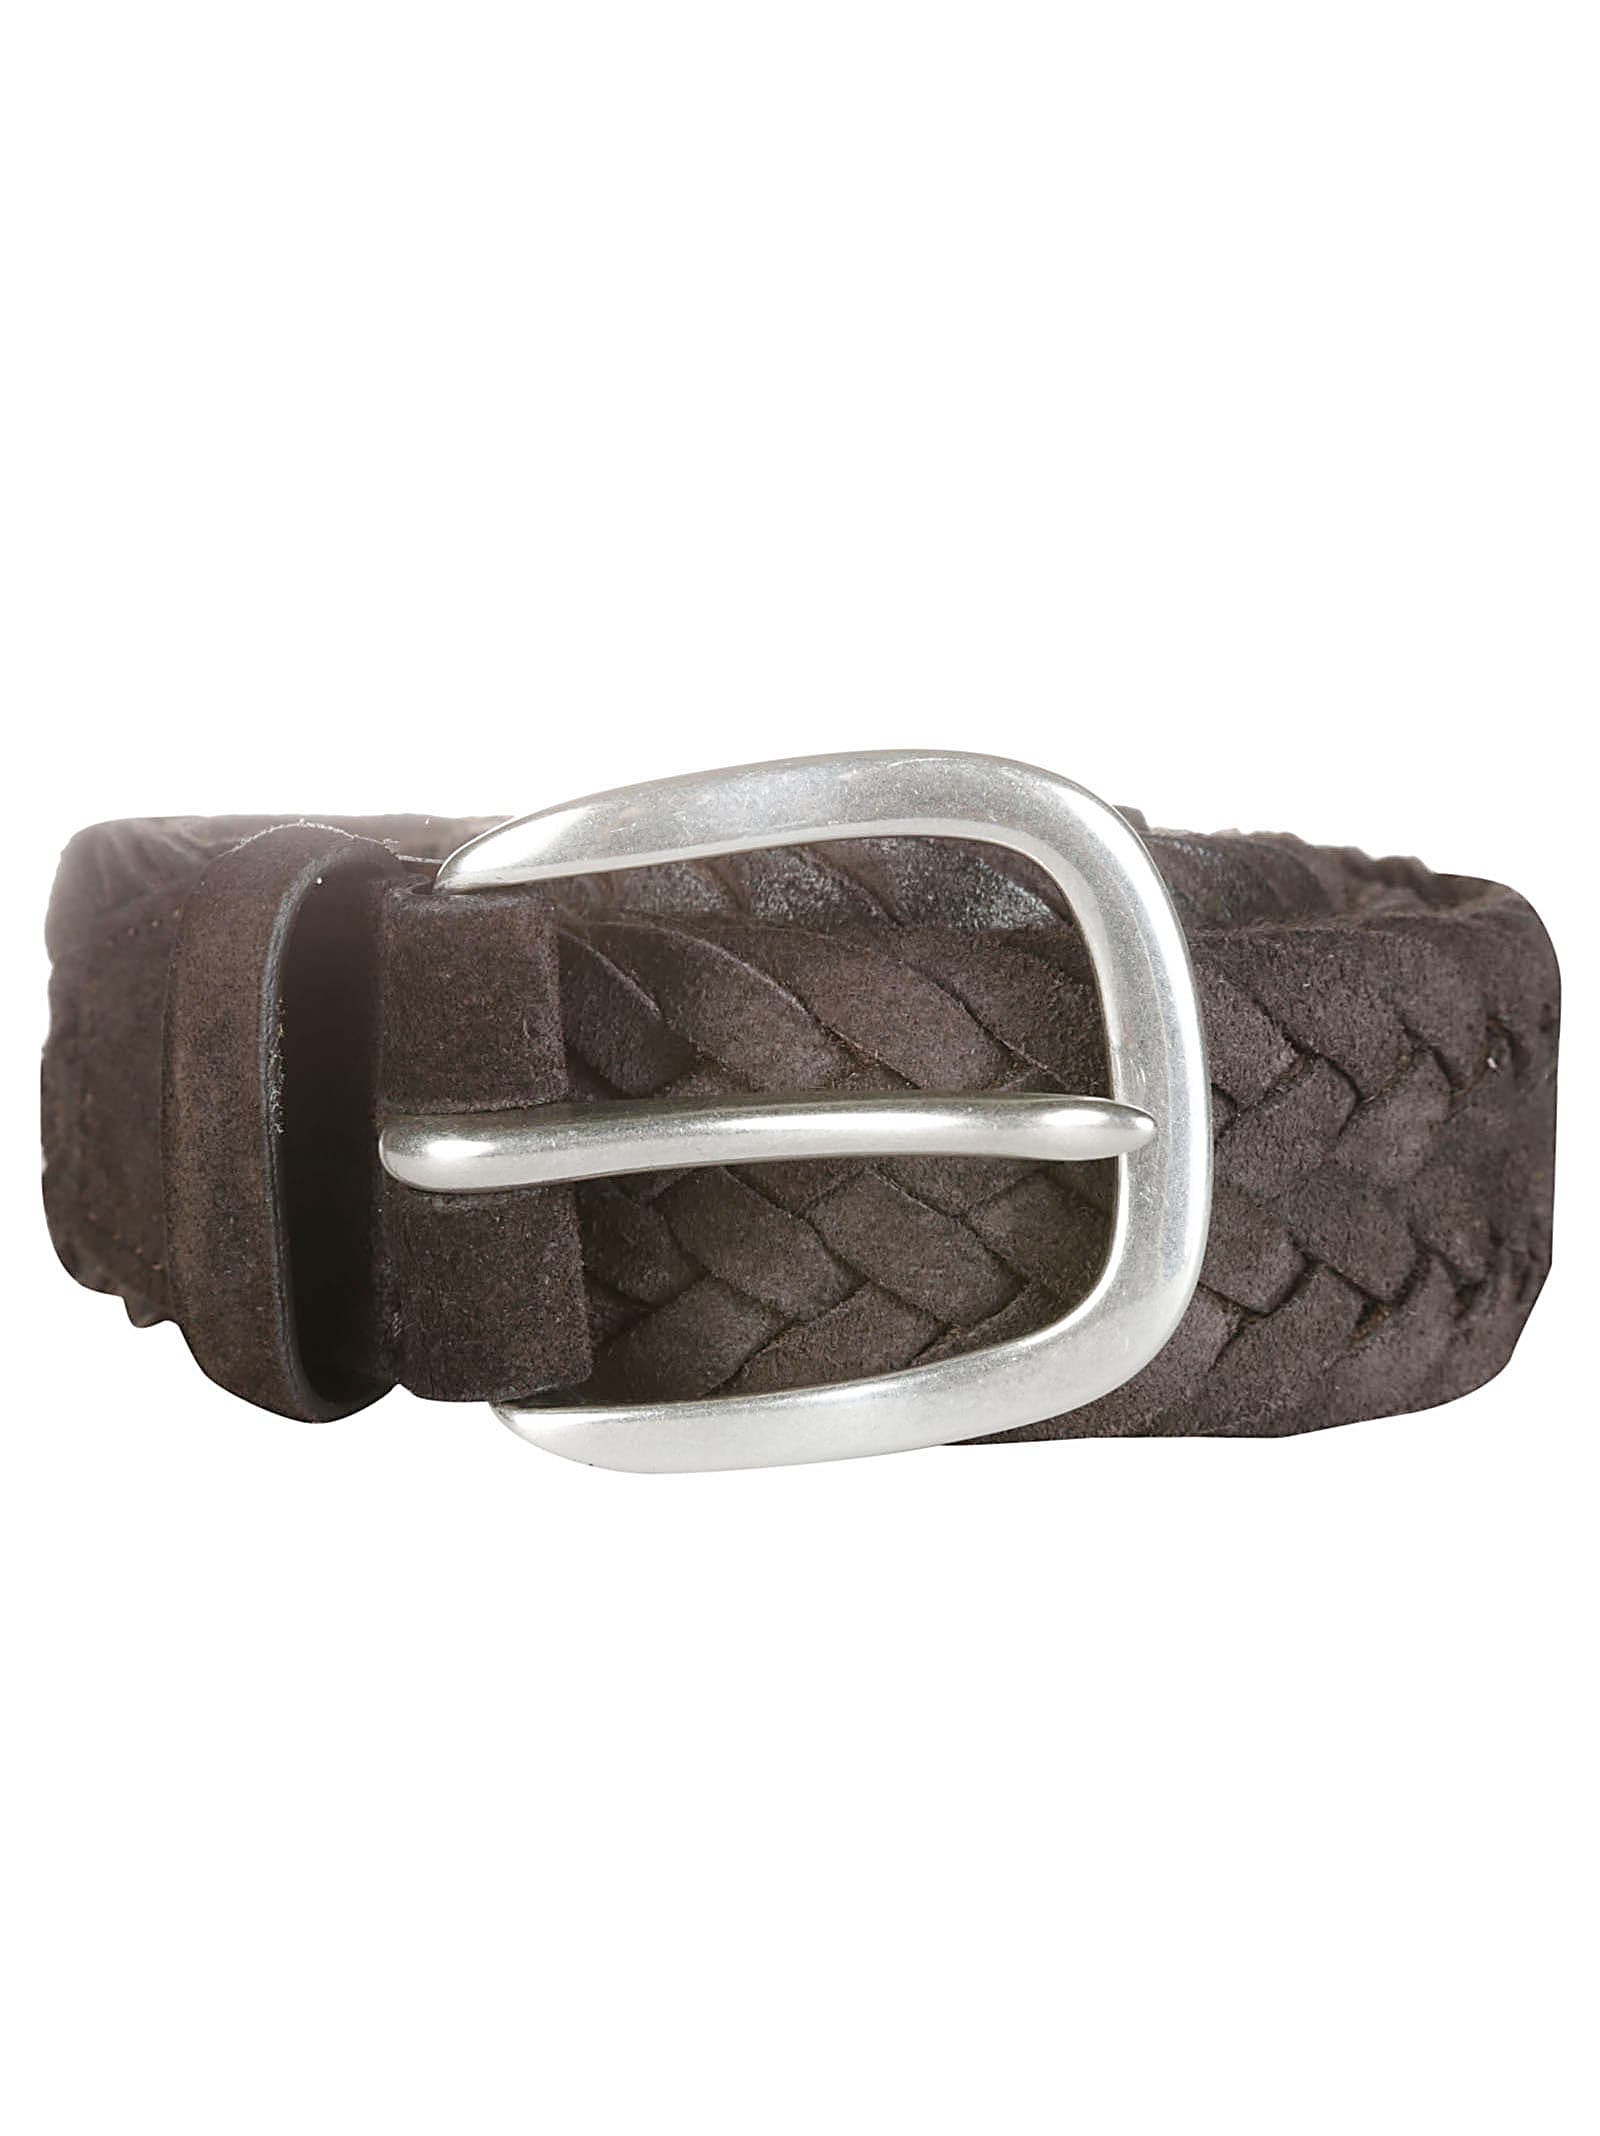 ORCIANI SUEDE BRAIDED BELT